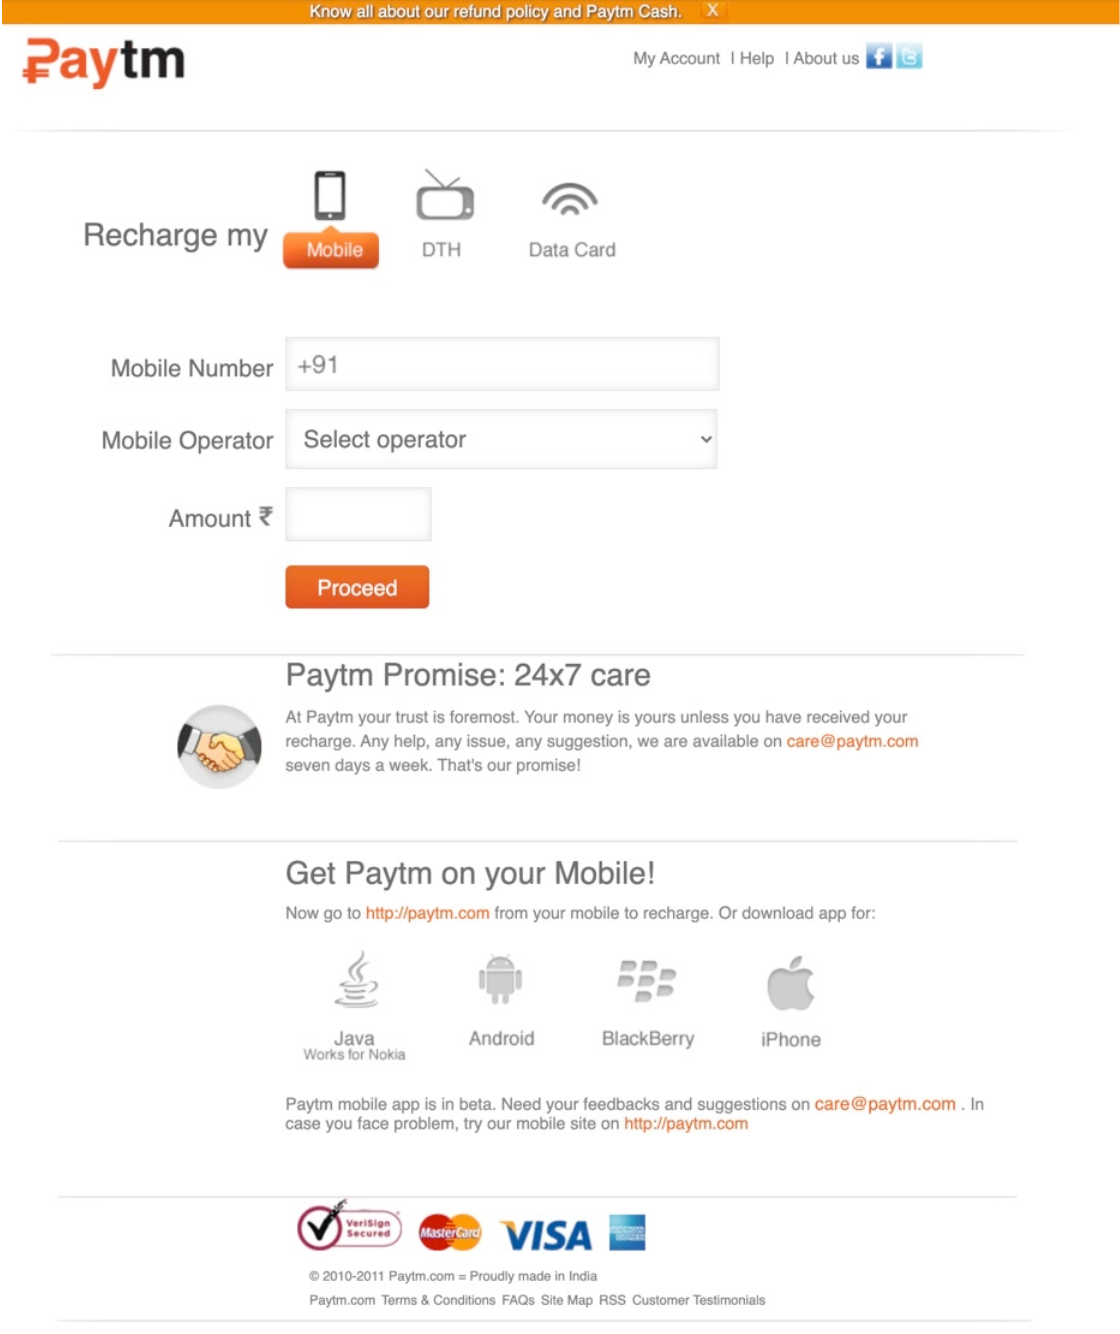 Snapshot of the first Paytm website